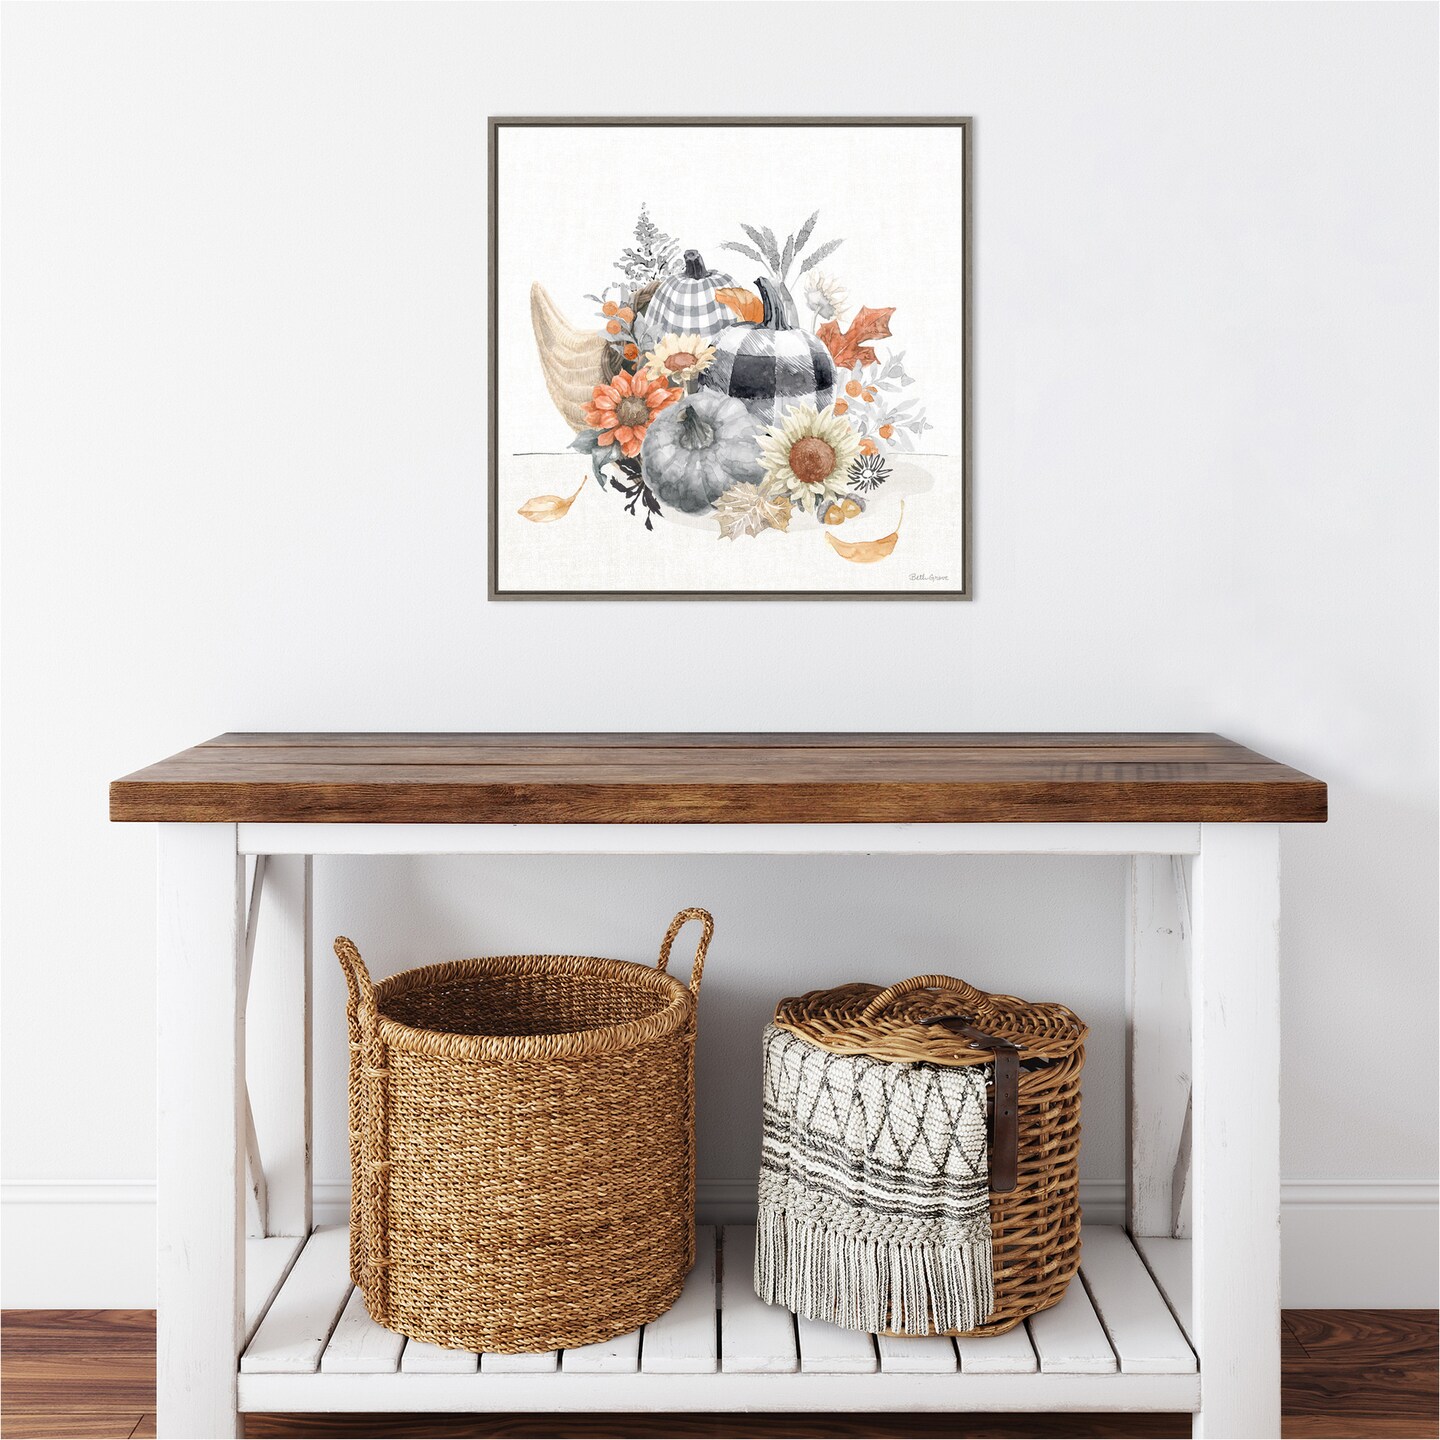 Harvest Classics VIII by Beth Grove 22-in. W x 22-in. H. Canvas Wall Art Print Framed in Grey